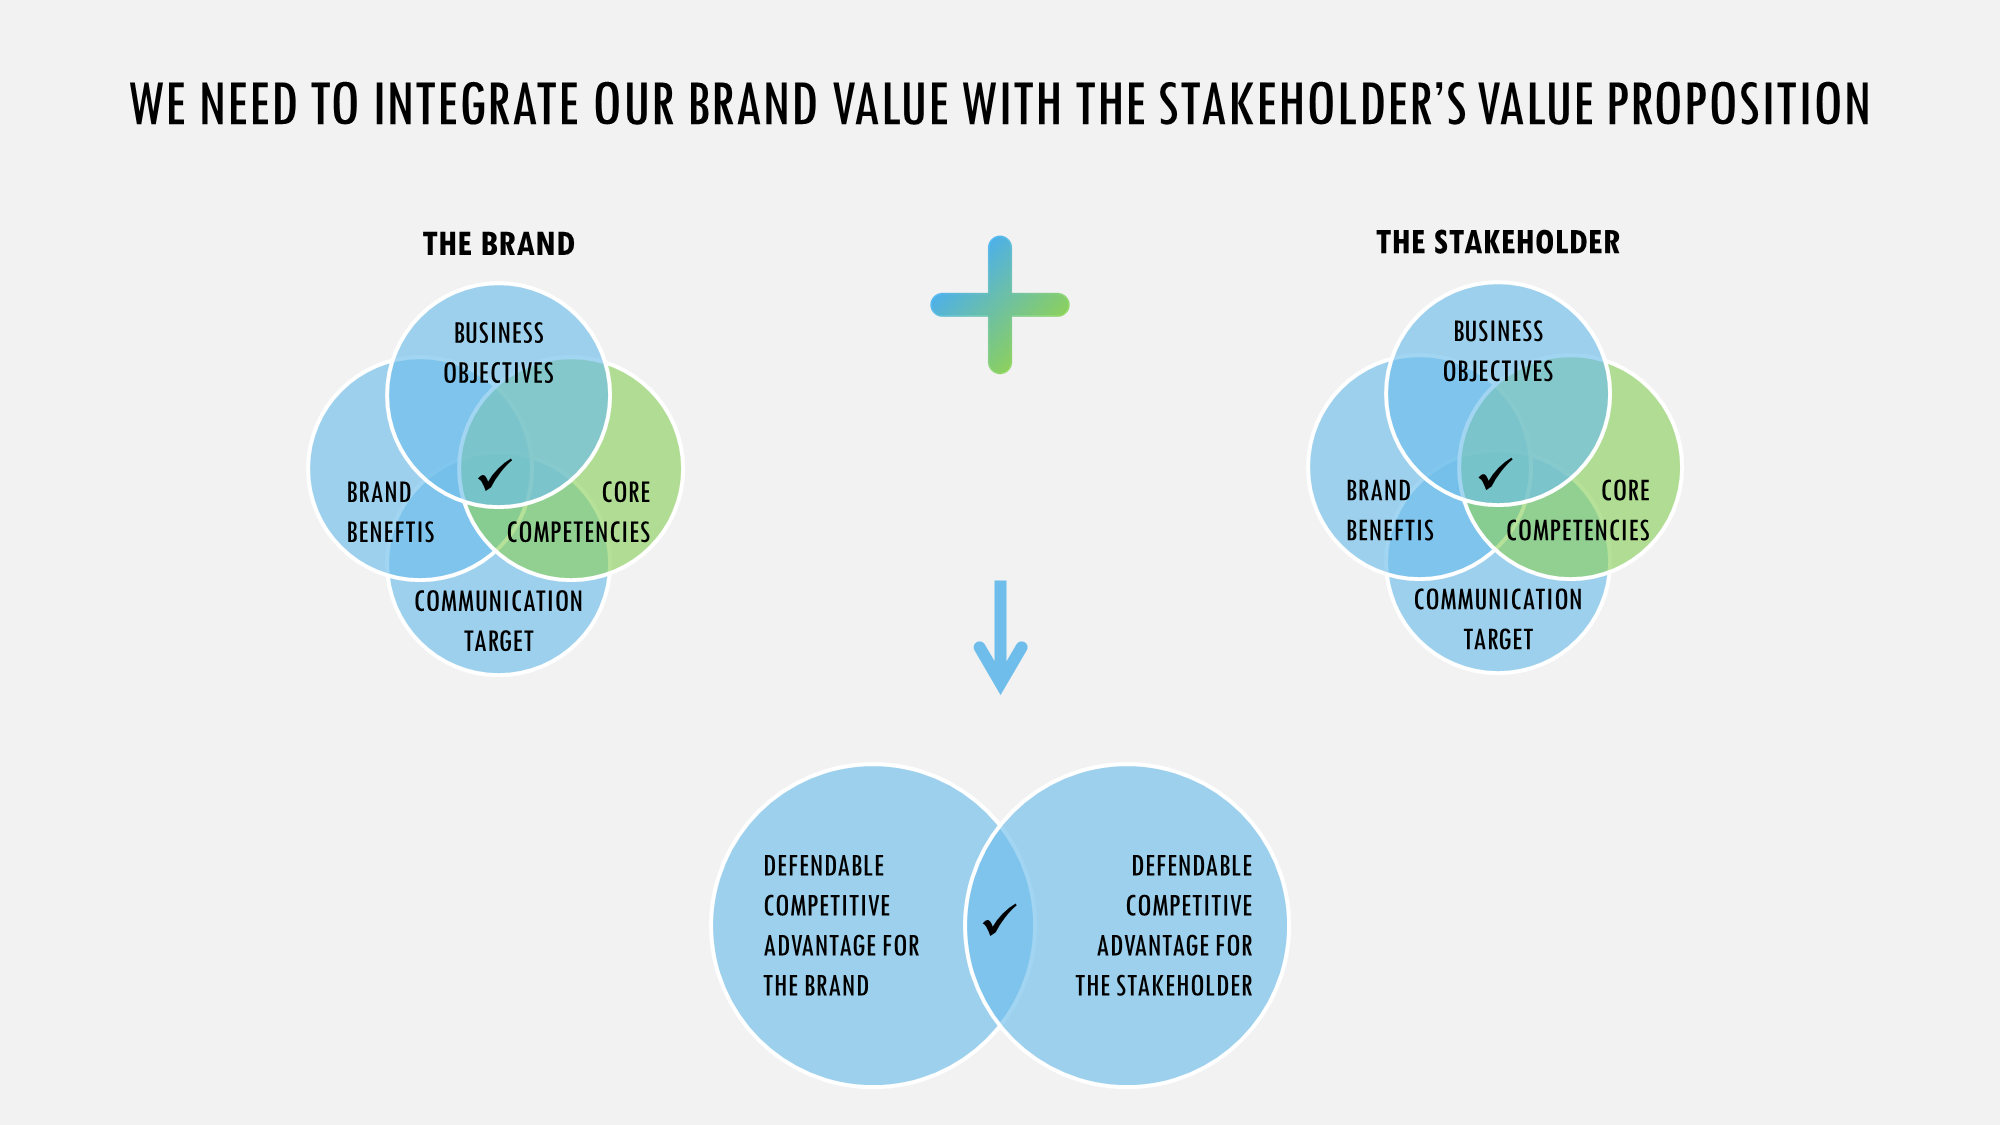 Destination planning: integrating brand value with stakeholder's value proposition